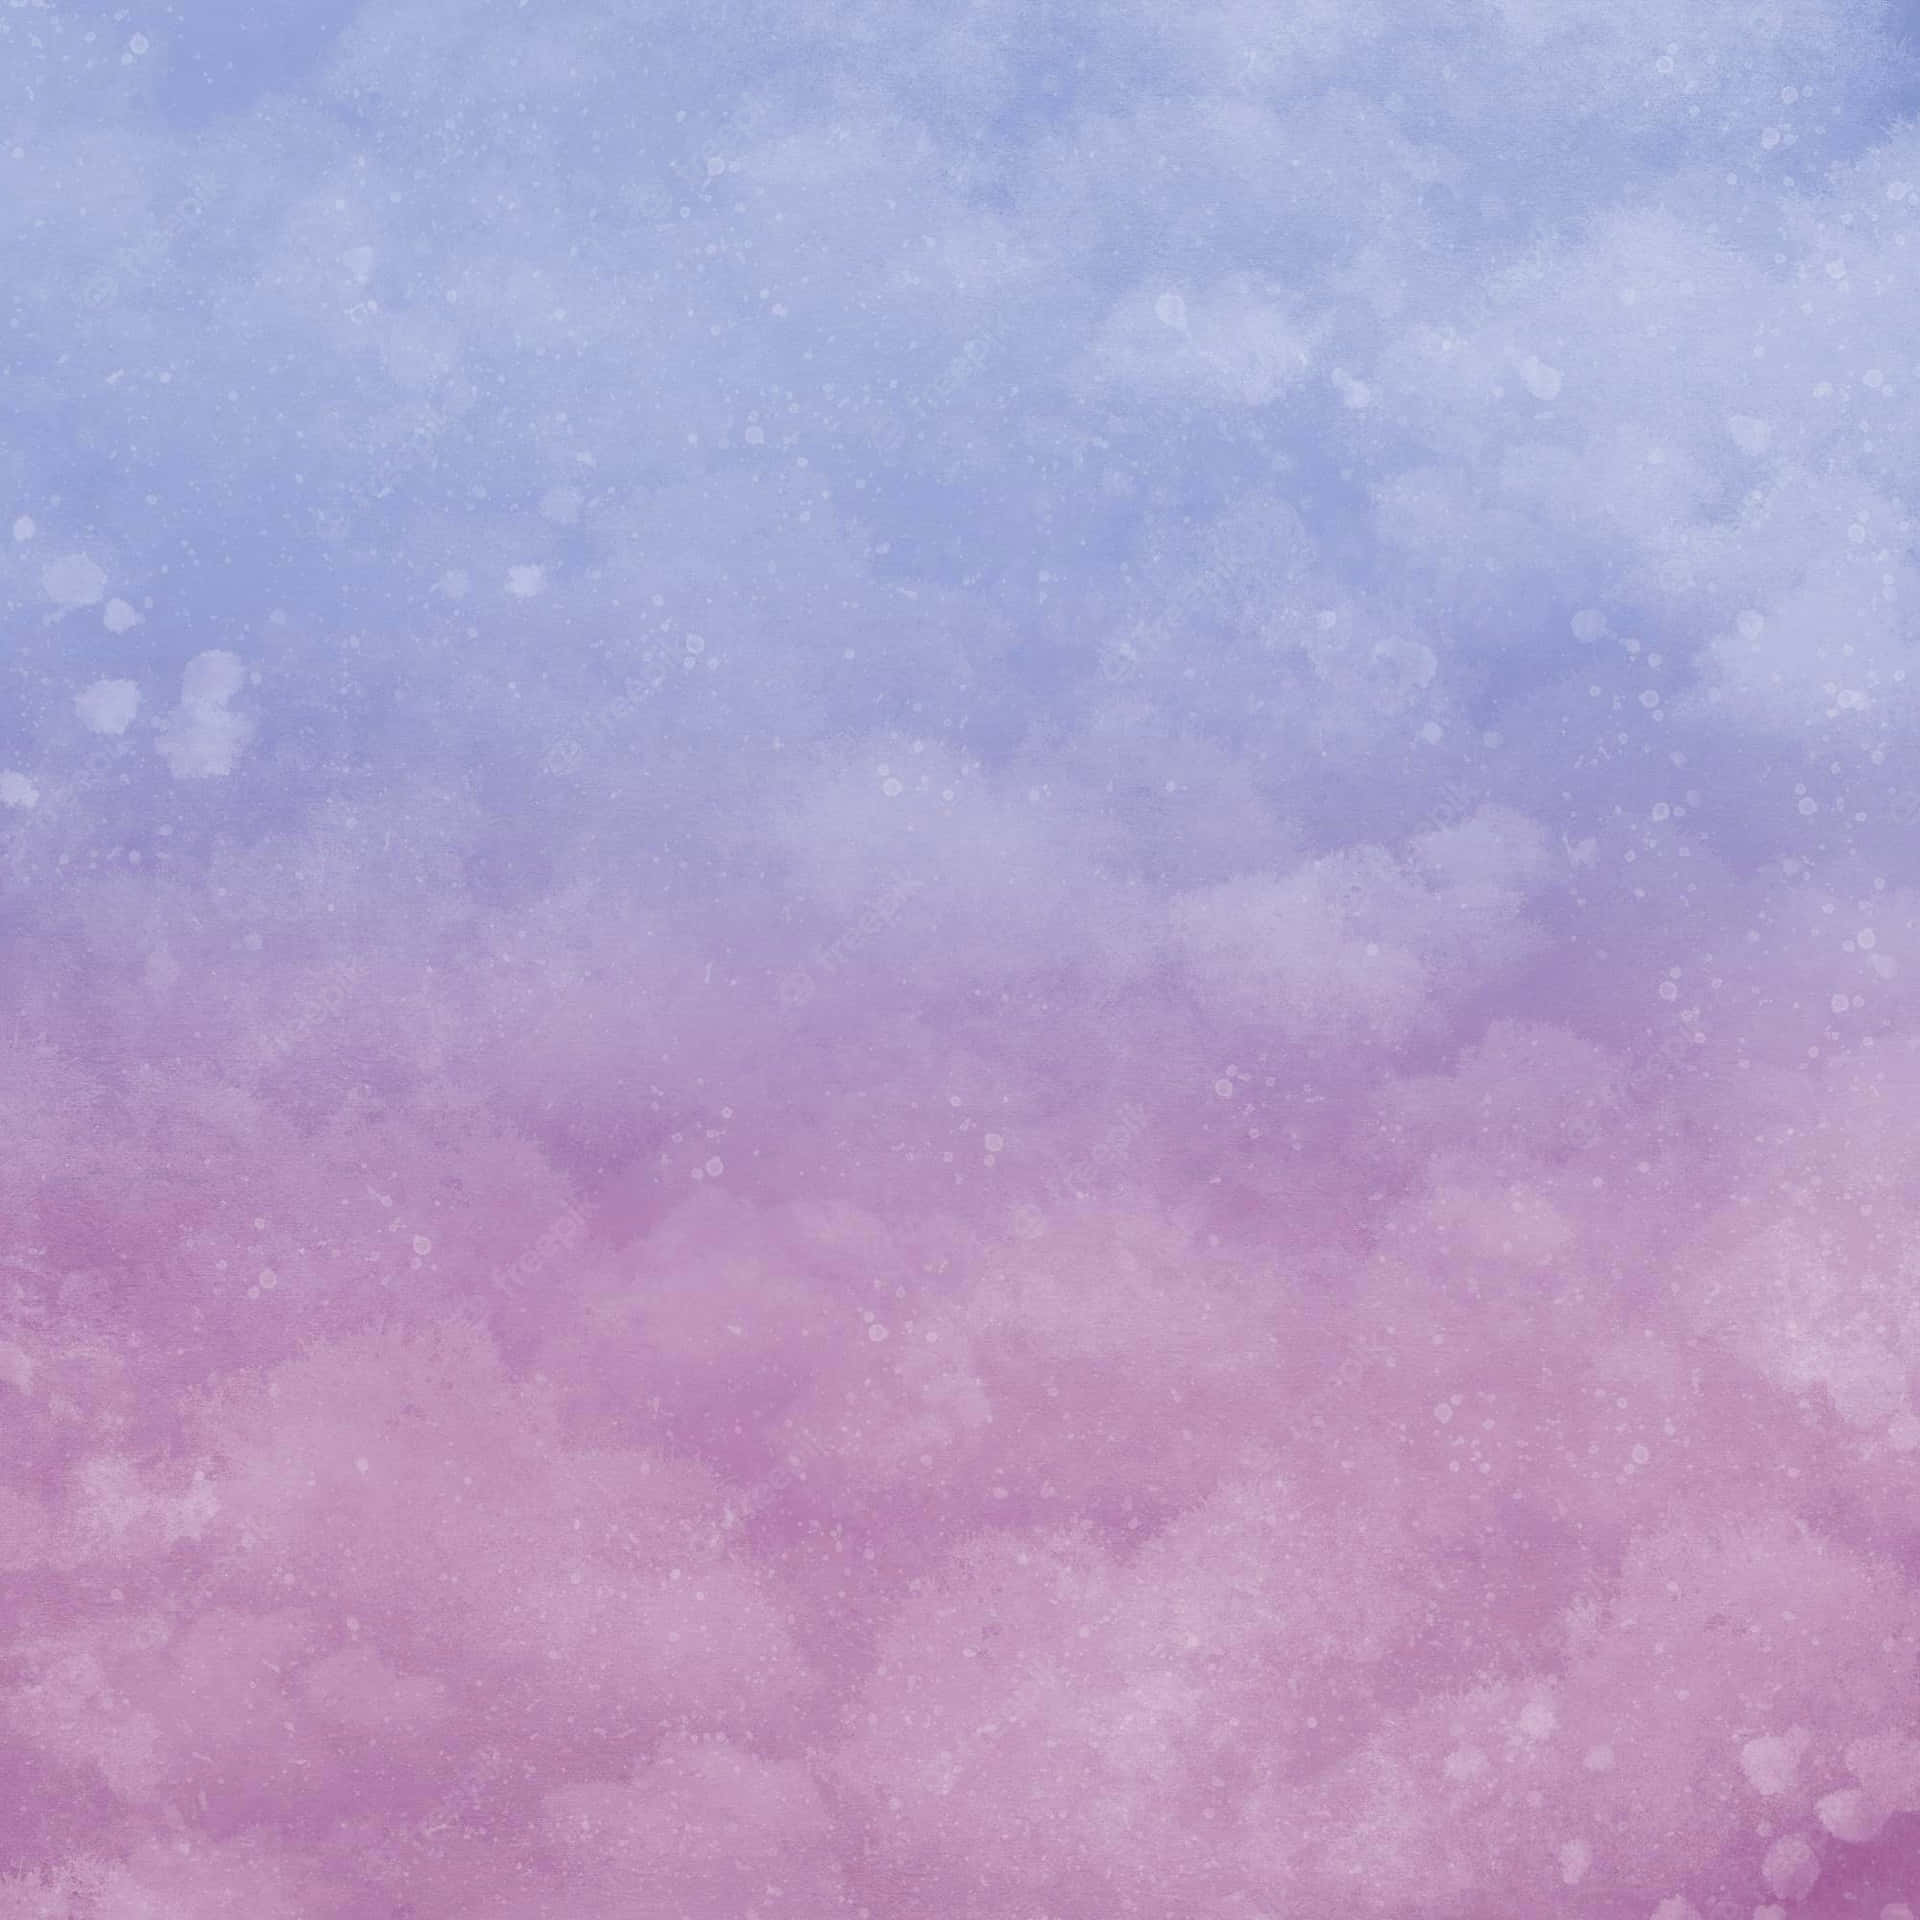 A Calm Vibes of Purple and Blue Ombre Wallpaper